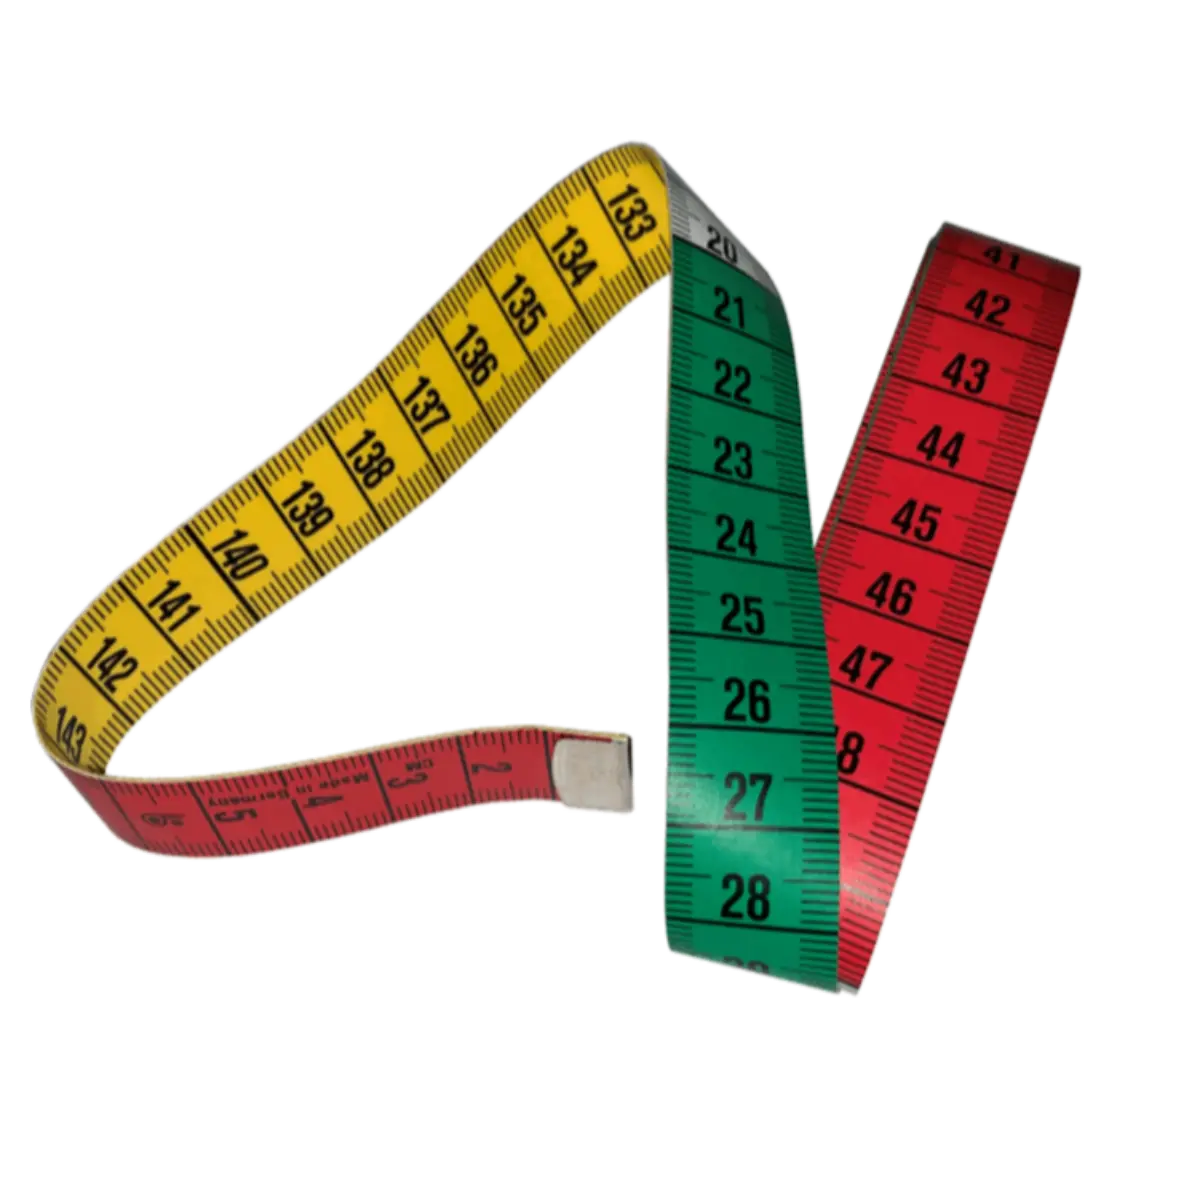 Decimetric Zone Metric Tape Measure Marked in 10cm intervals by colour blocks Easily Visible Dressmakers, Tailors, Pattern Designers, Garment Makers